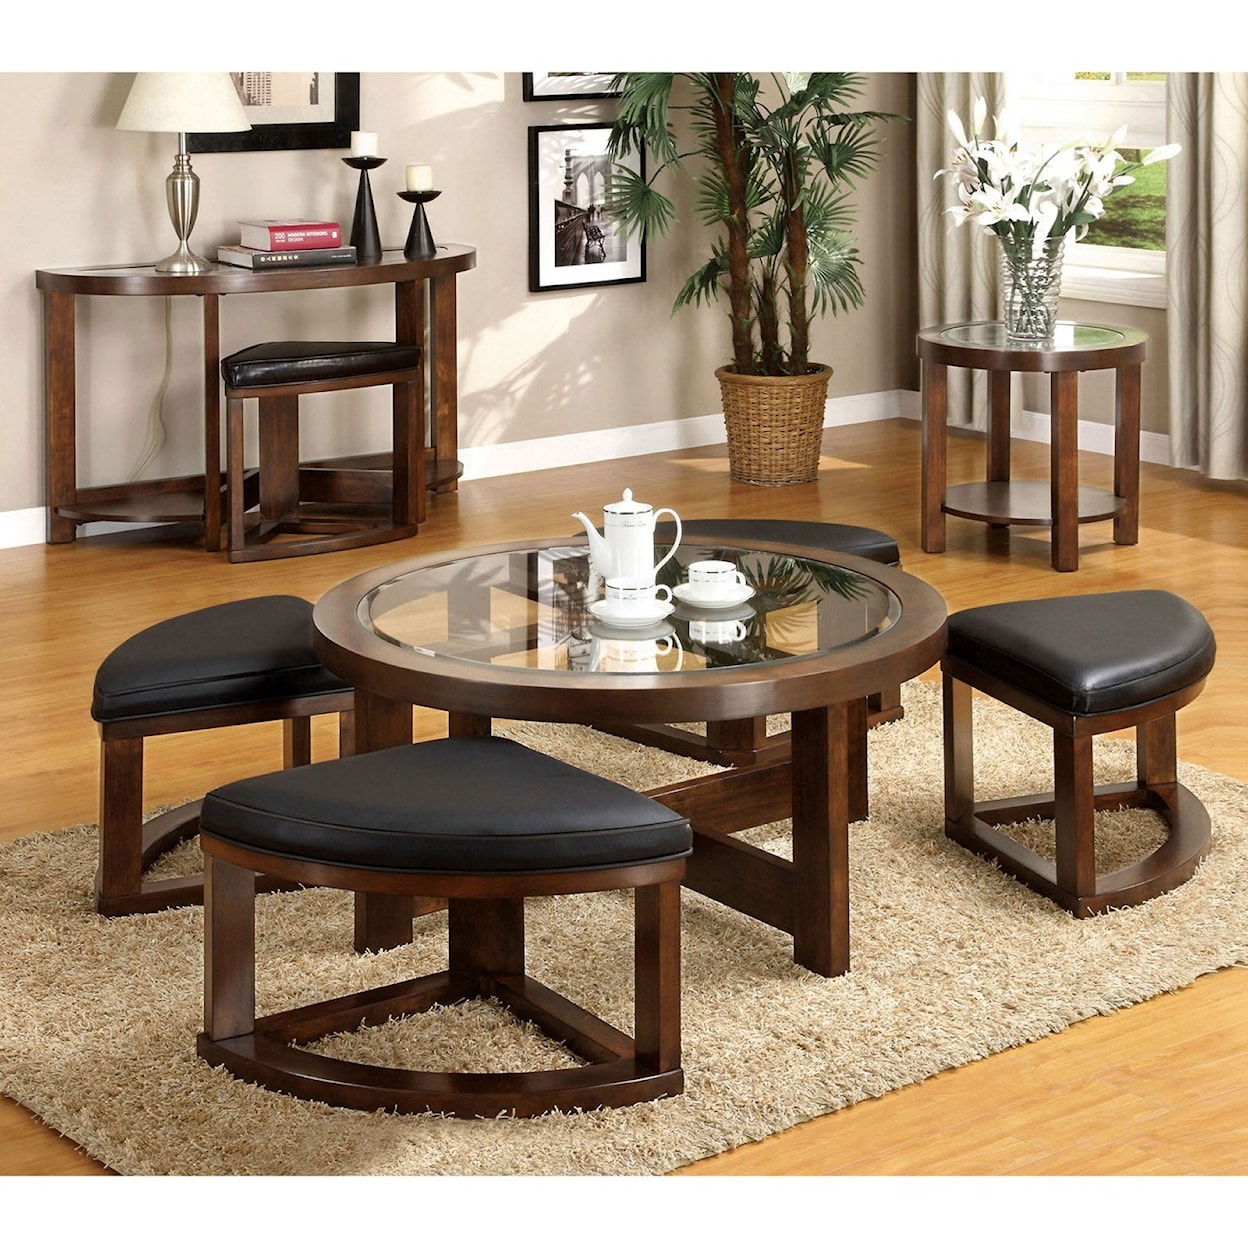 FUSA Crystal Cove II Cocktail Table with Ottomans